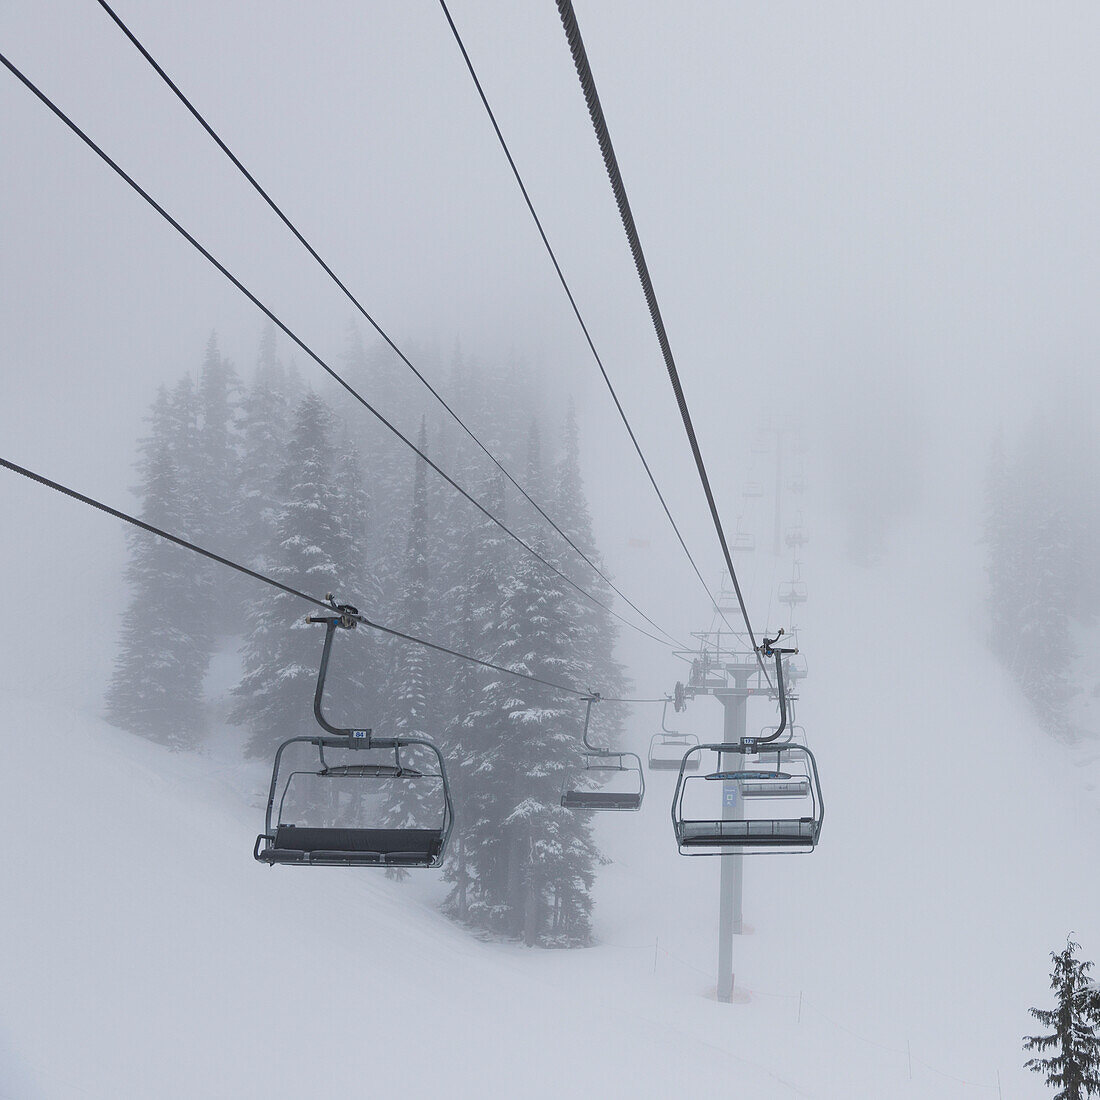 Empty chairlift at a ski resort in fog, Whistler, British Columbia, Canada